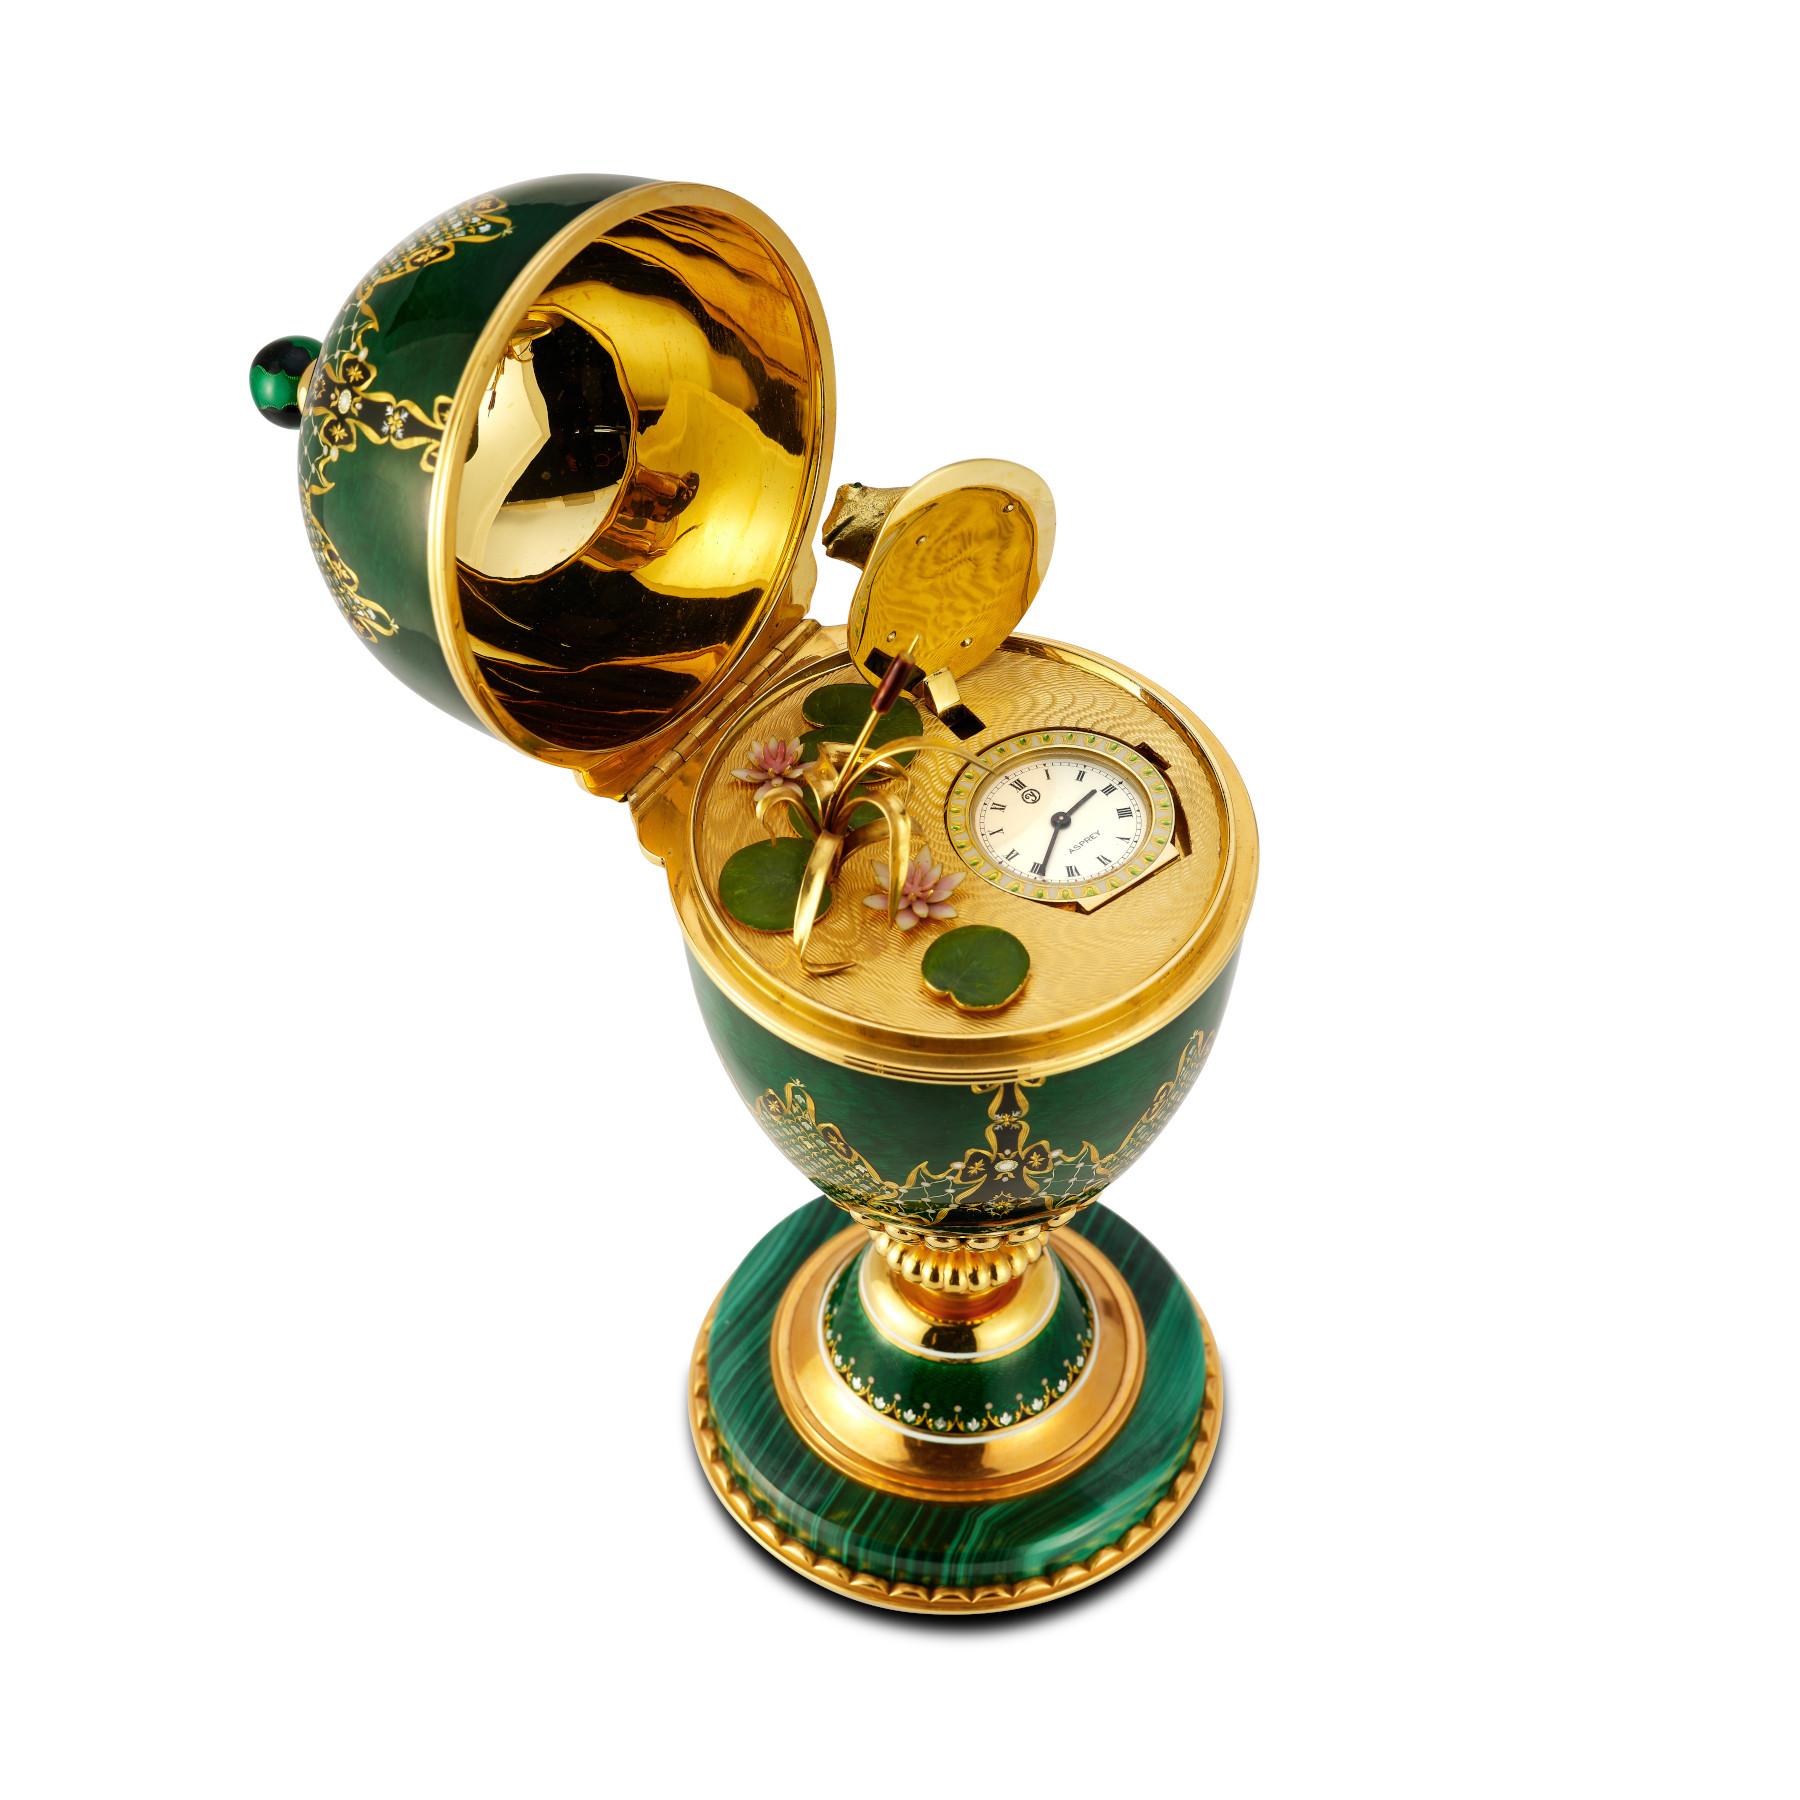 Asprey Malachite & Enamel Desk Clock

A mechanical clock made by Asprey in London in 1979. The clock is housed inside an 18 karat gold enameled egg that sits on a malachite base. When opened, the egg reveals a miniature swamp scene with lily pads